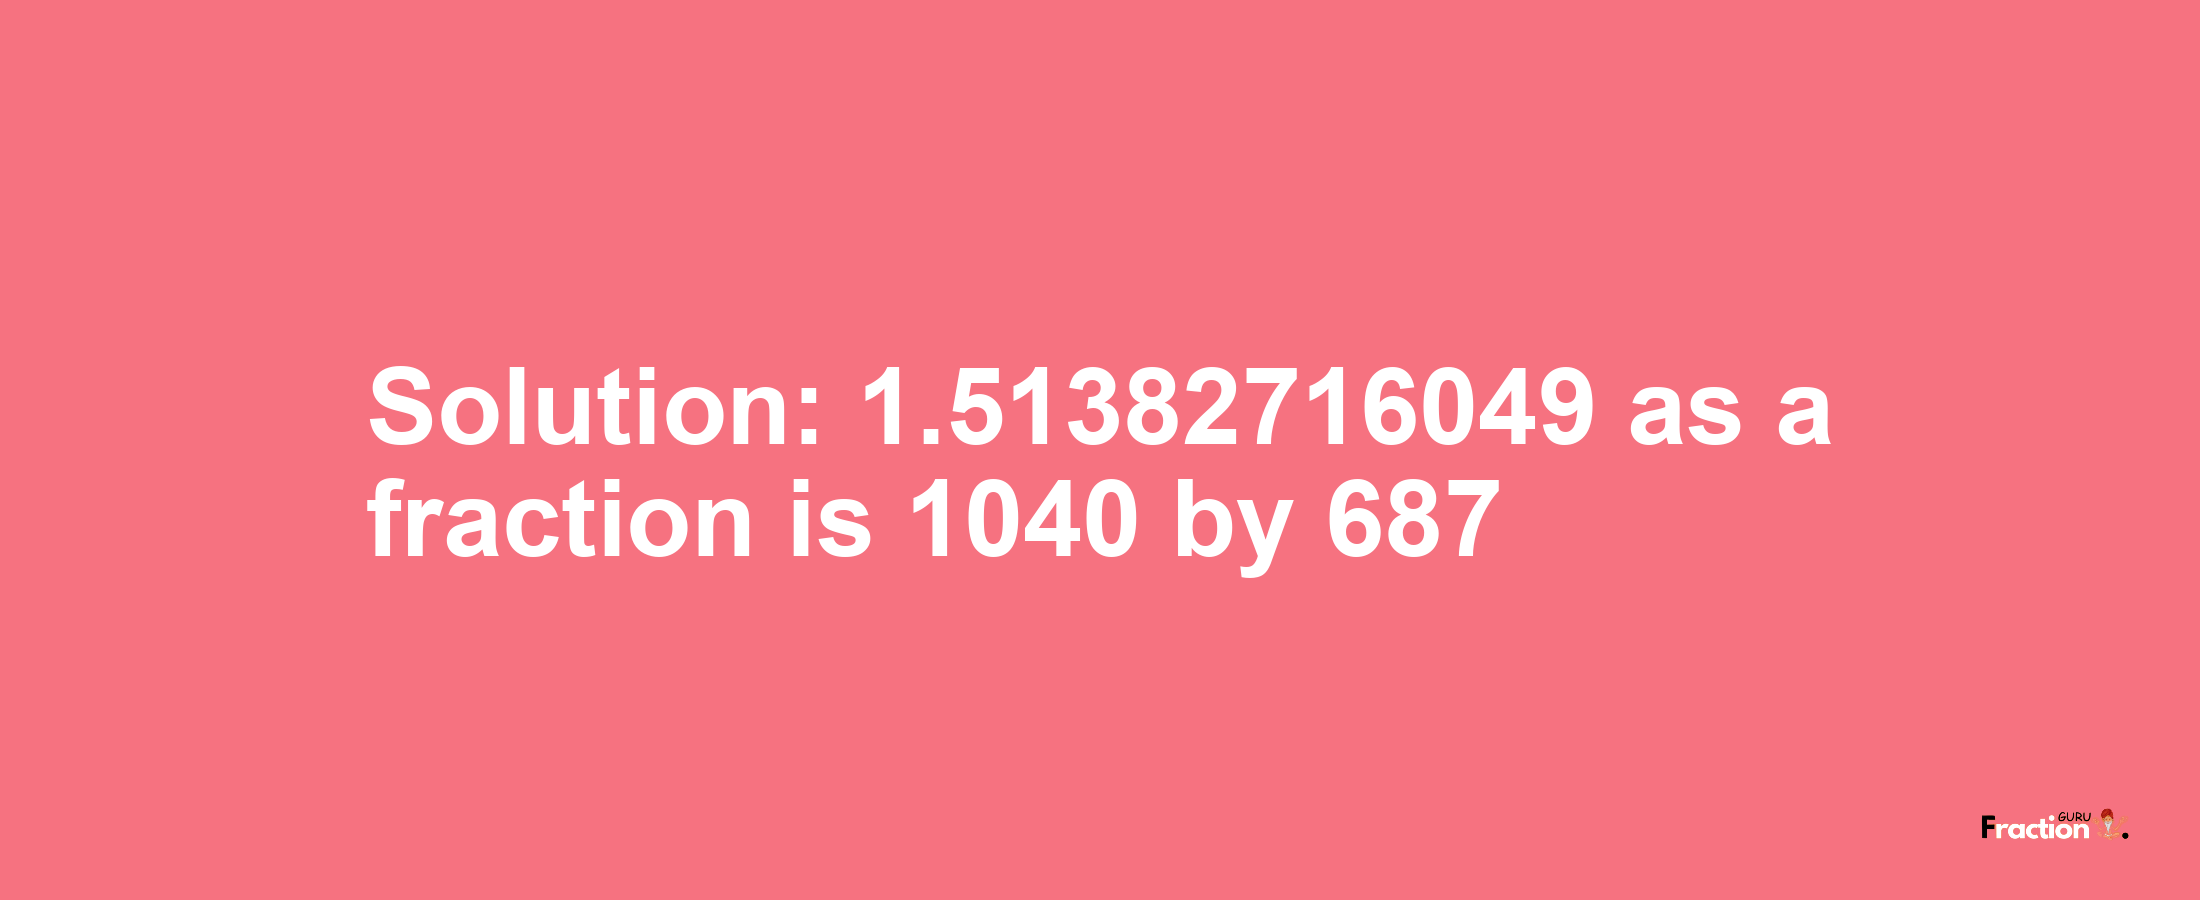 Solution:1.51382716049 as a fraction is 1040/687